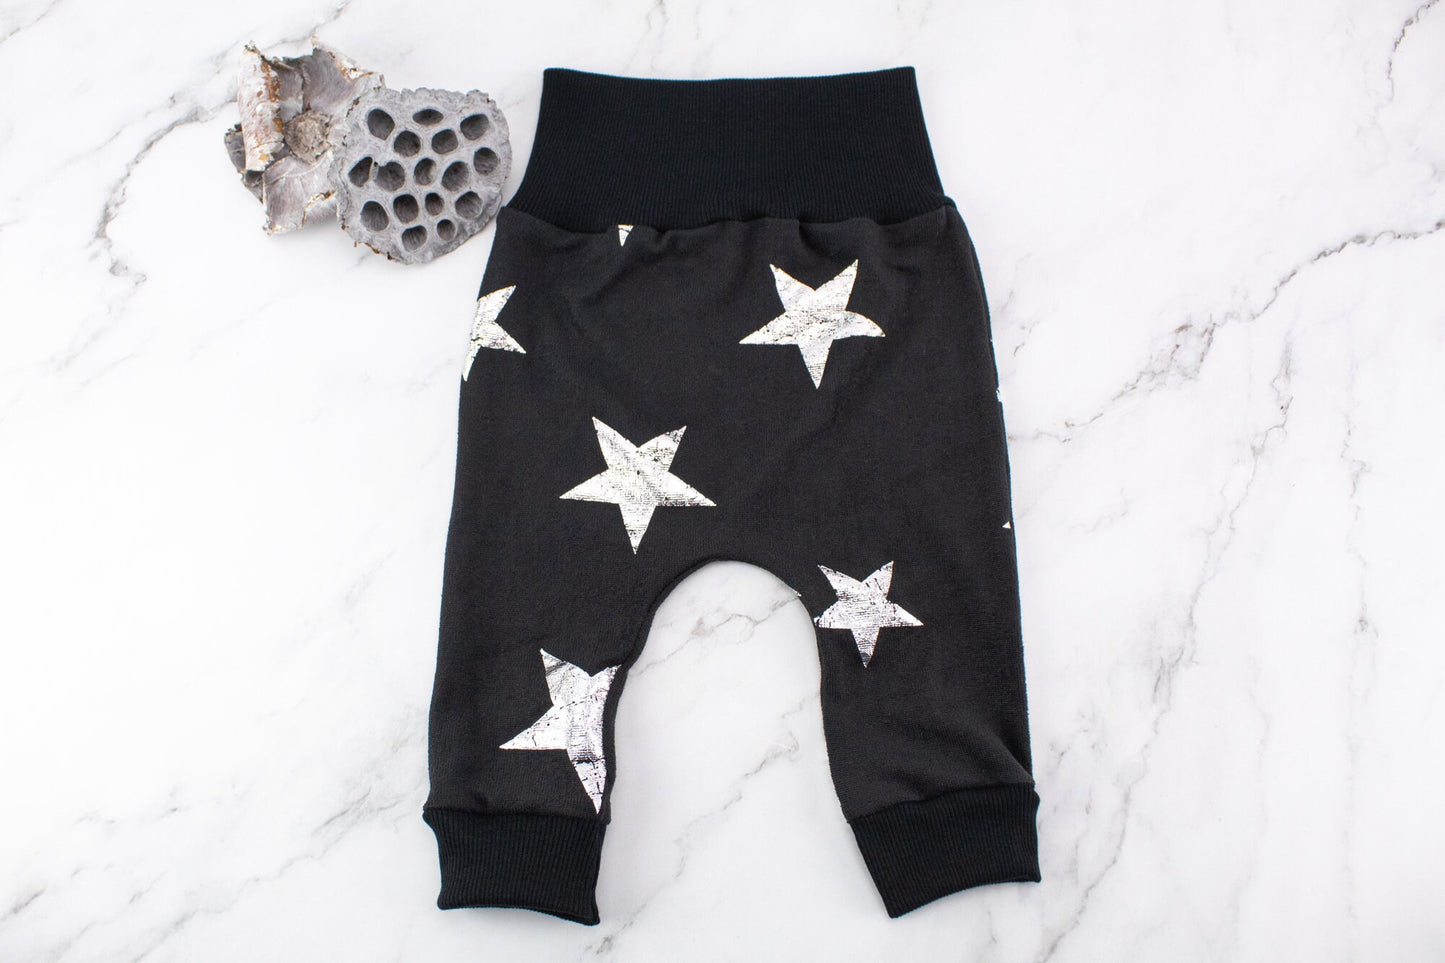 Black and Silver Distressed Stars Knit Harem Pants with Wide Black Band 3-6 months and 12-18 months